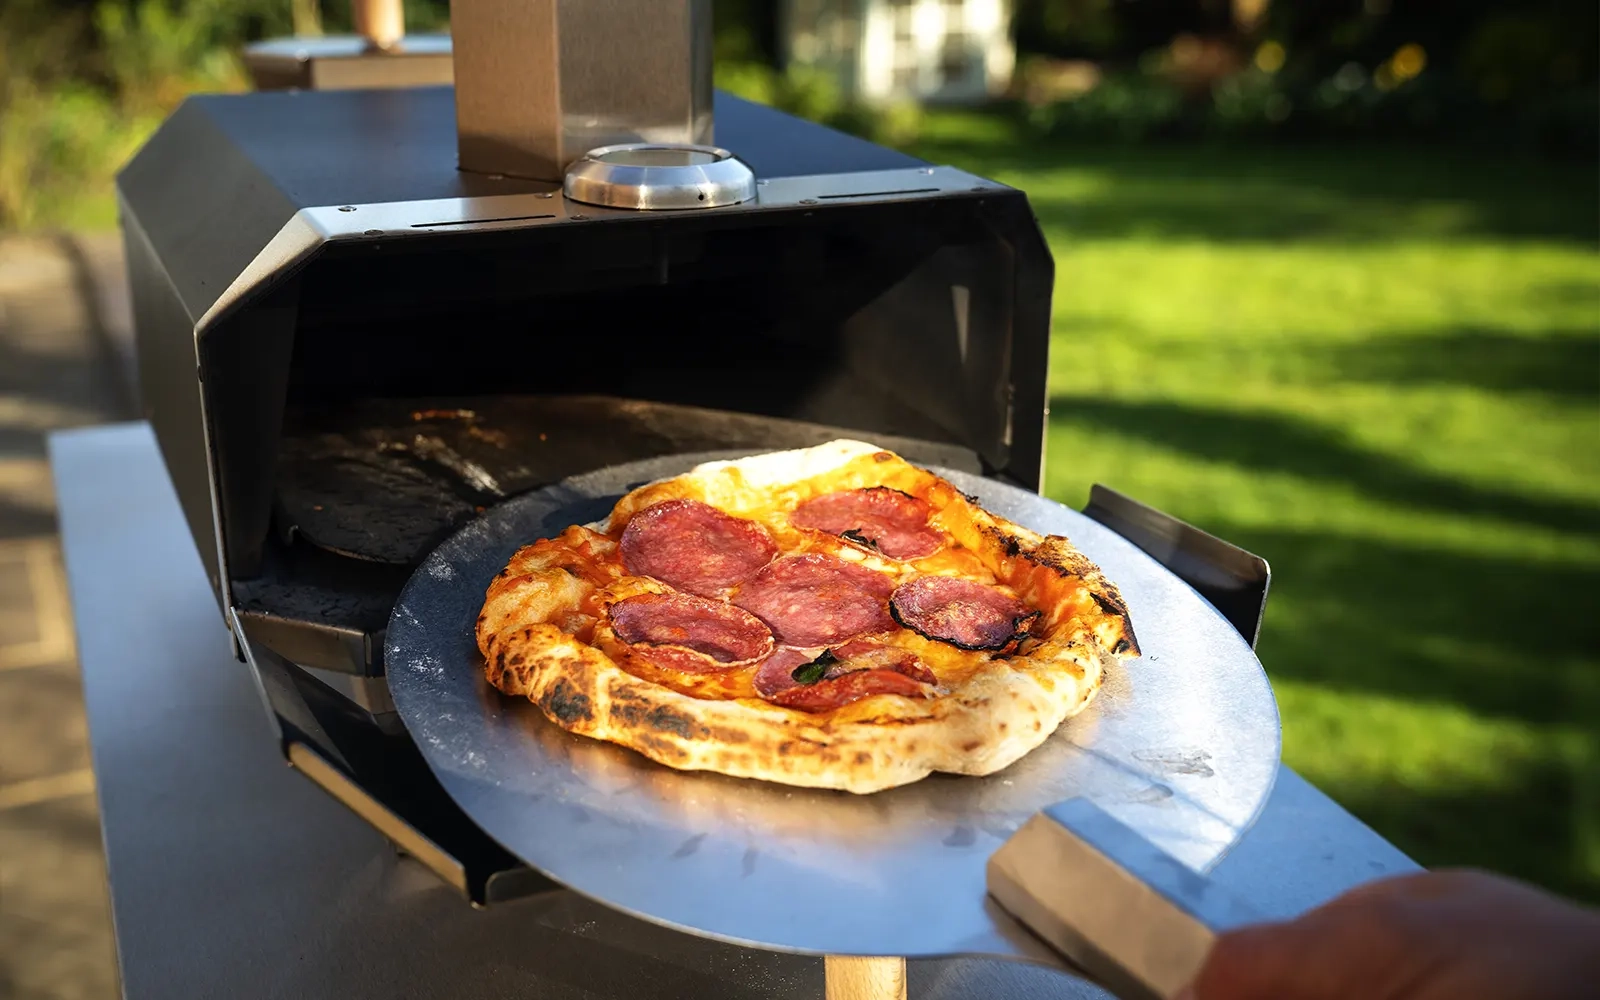 Close-up of a cooked pizza being taken out of a pizza oven on a pizza peel in a garden